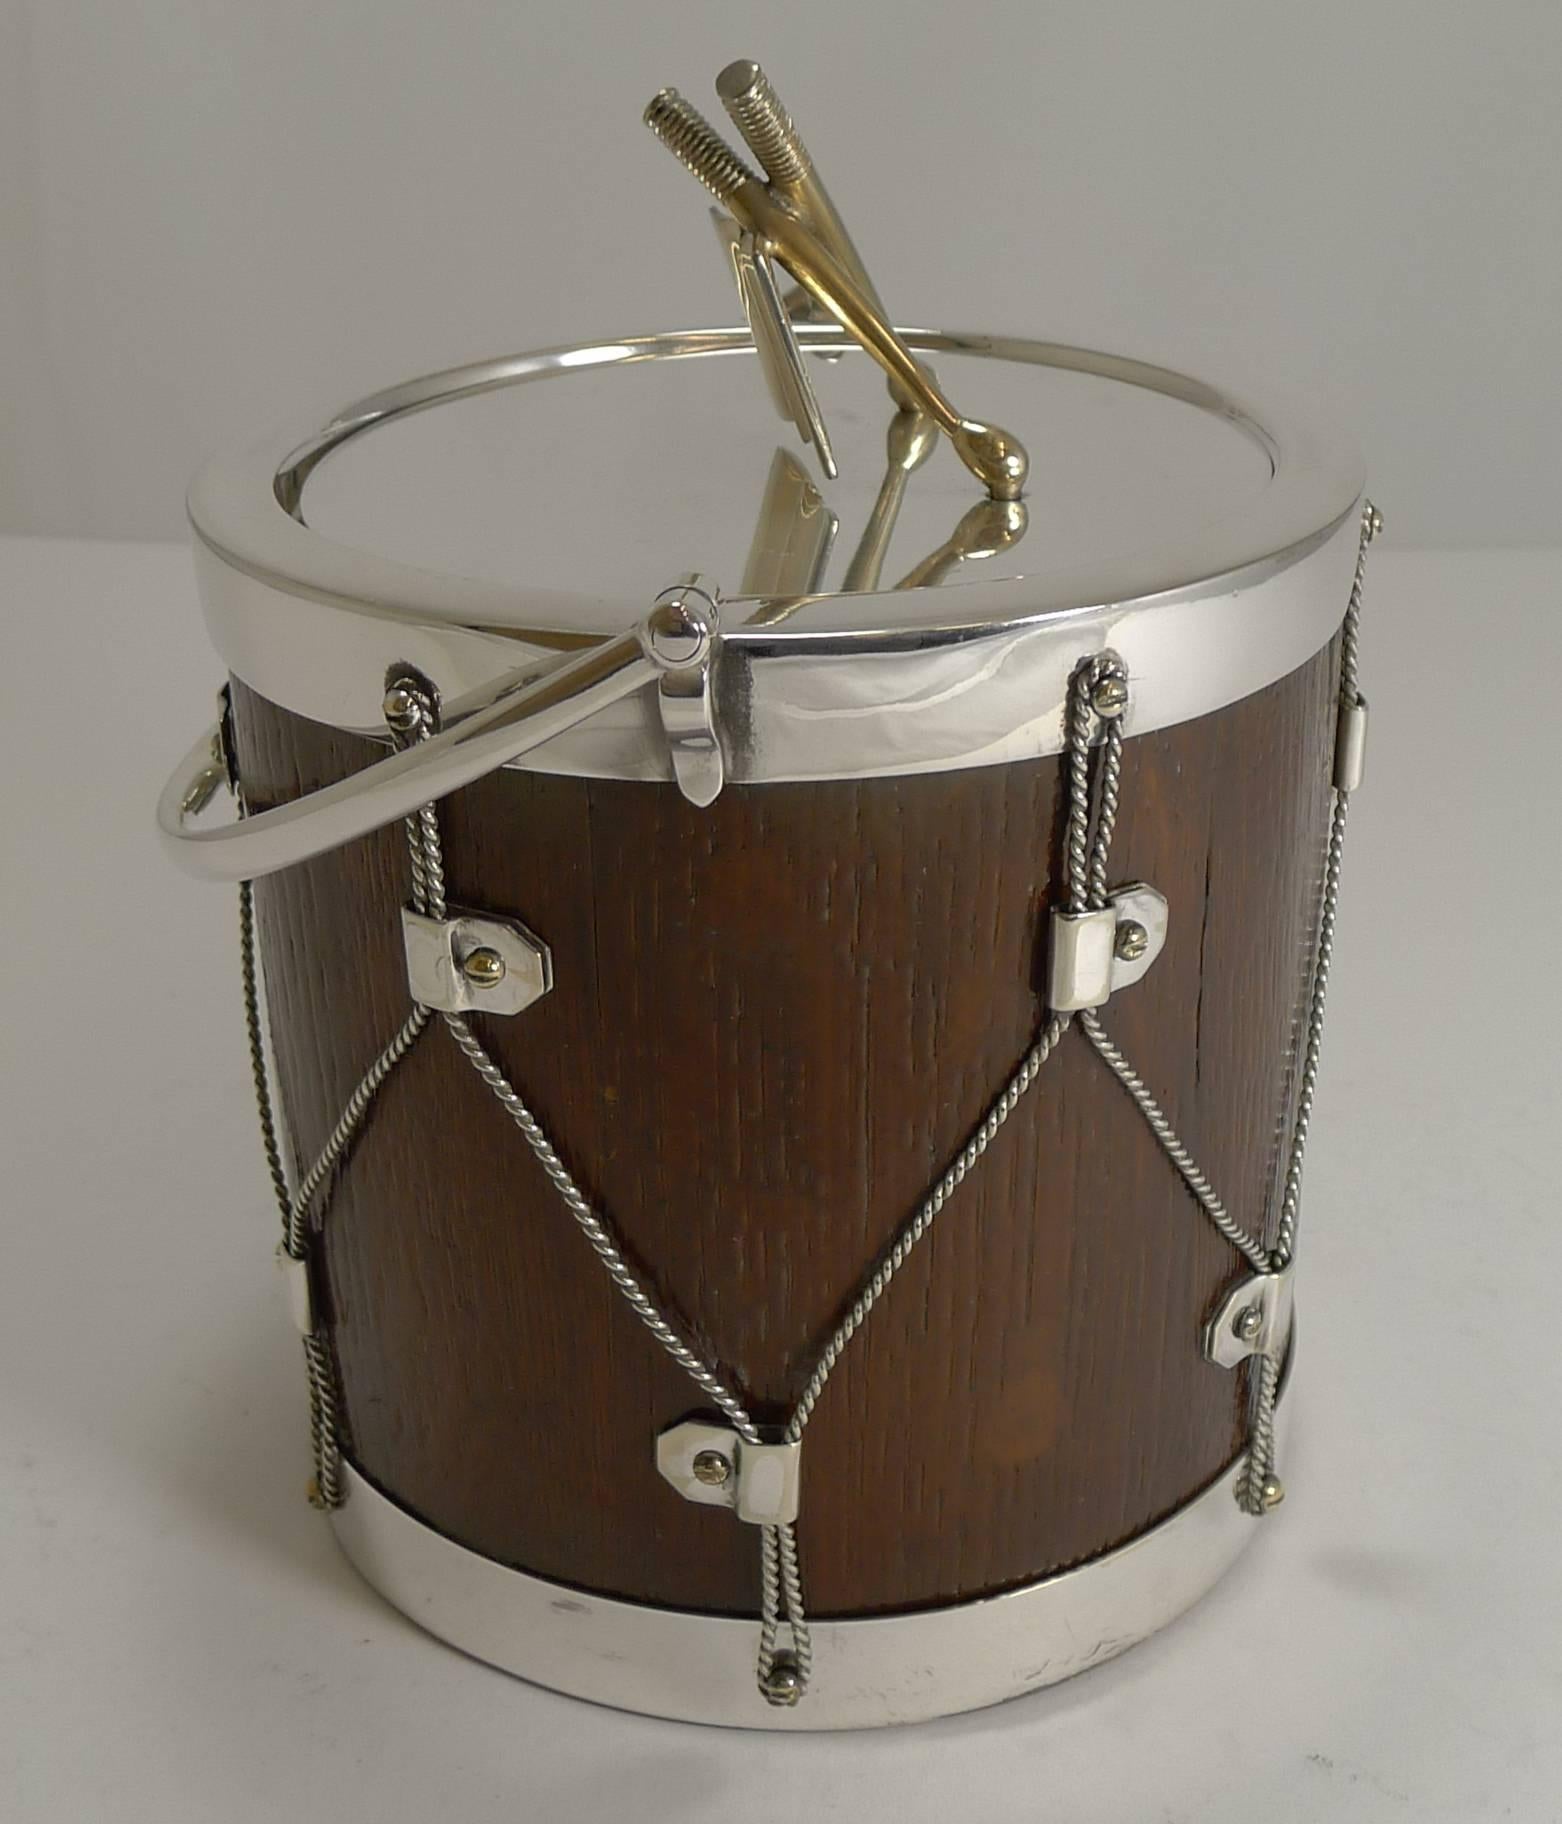 A wonderful Victorian biscuit box or barrel, always highly sought-after in this Drum form, I have probably not had one for three or four years, that's how scarce and hard to come by they are.

The fittings are made from silver plate with the lid